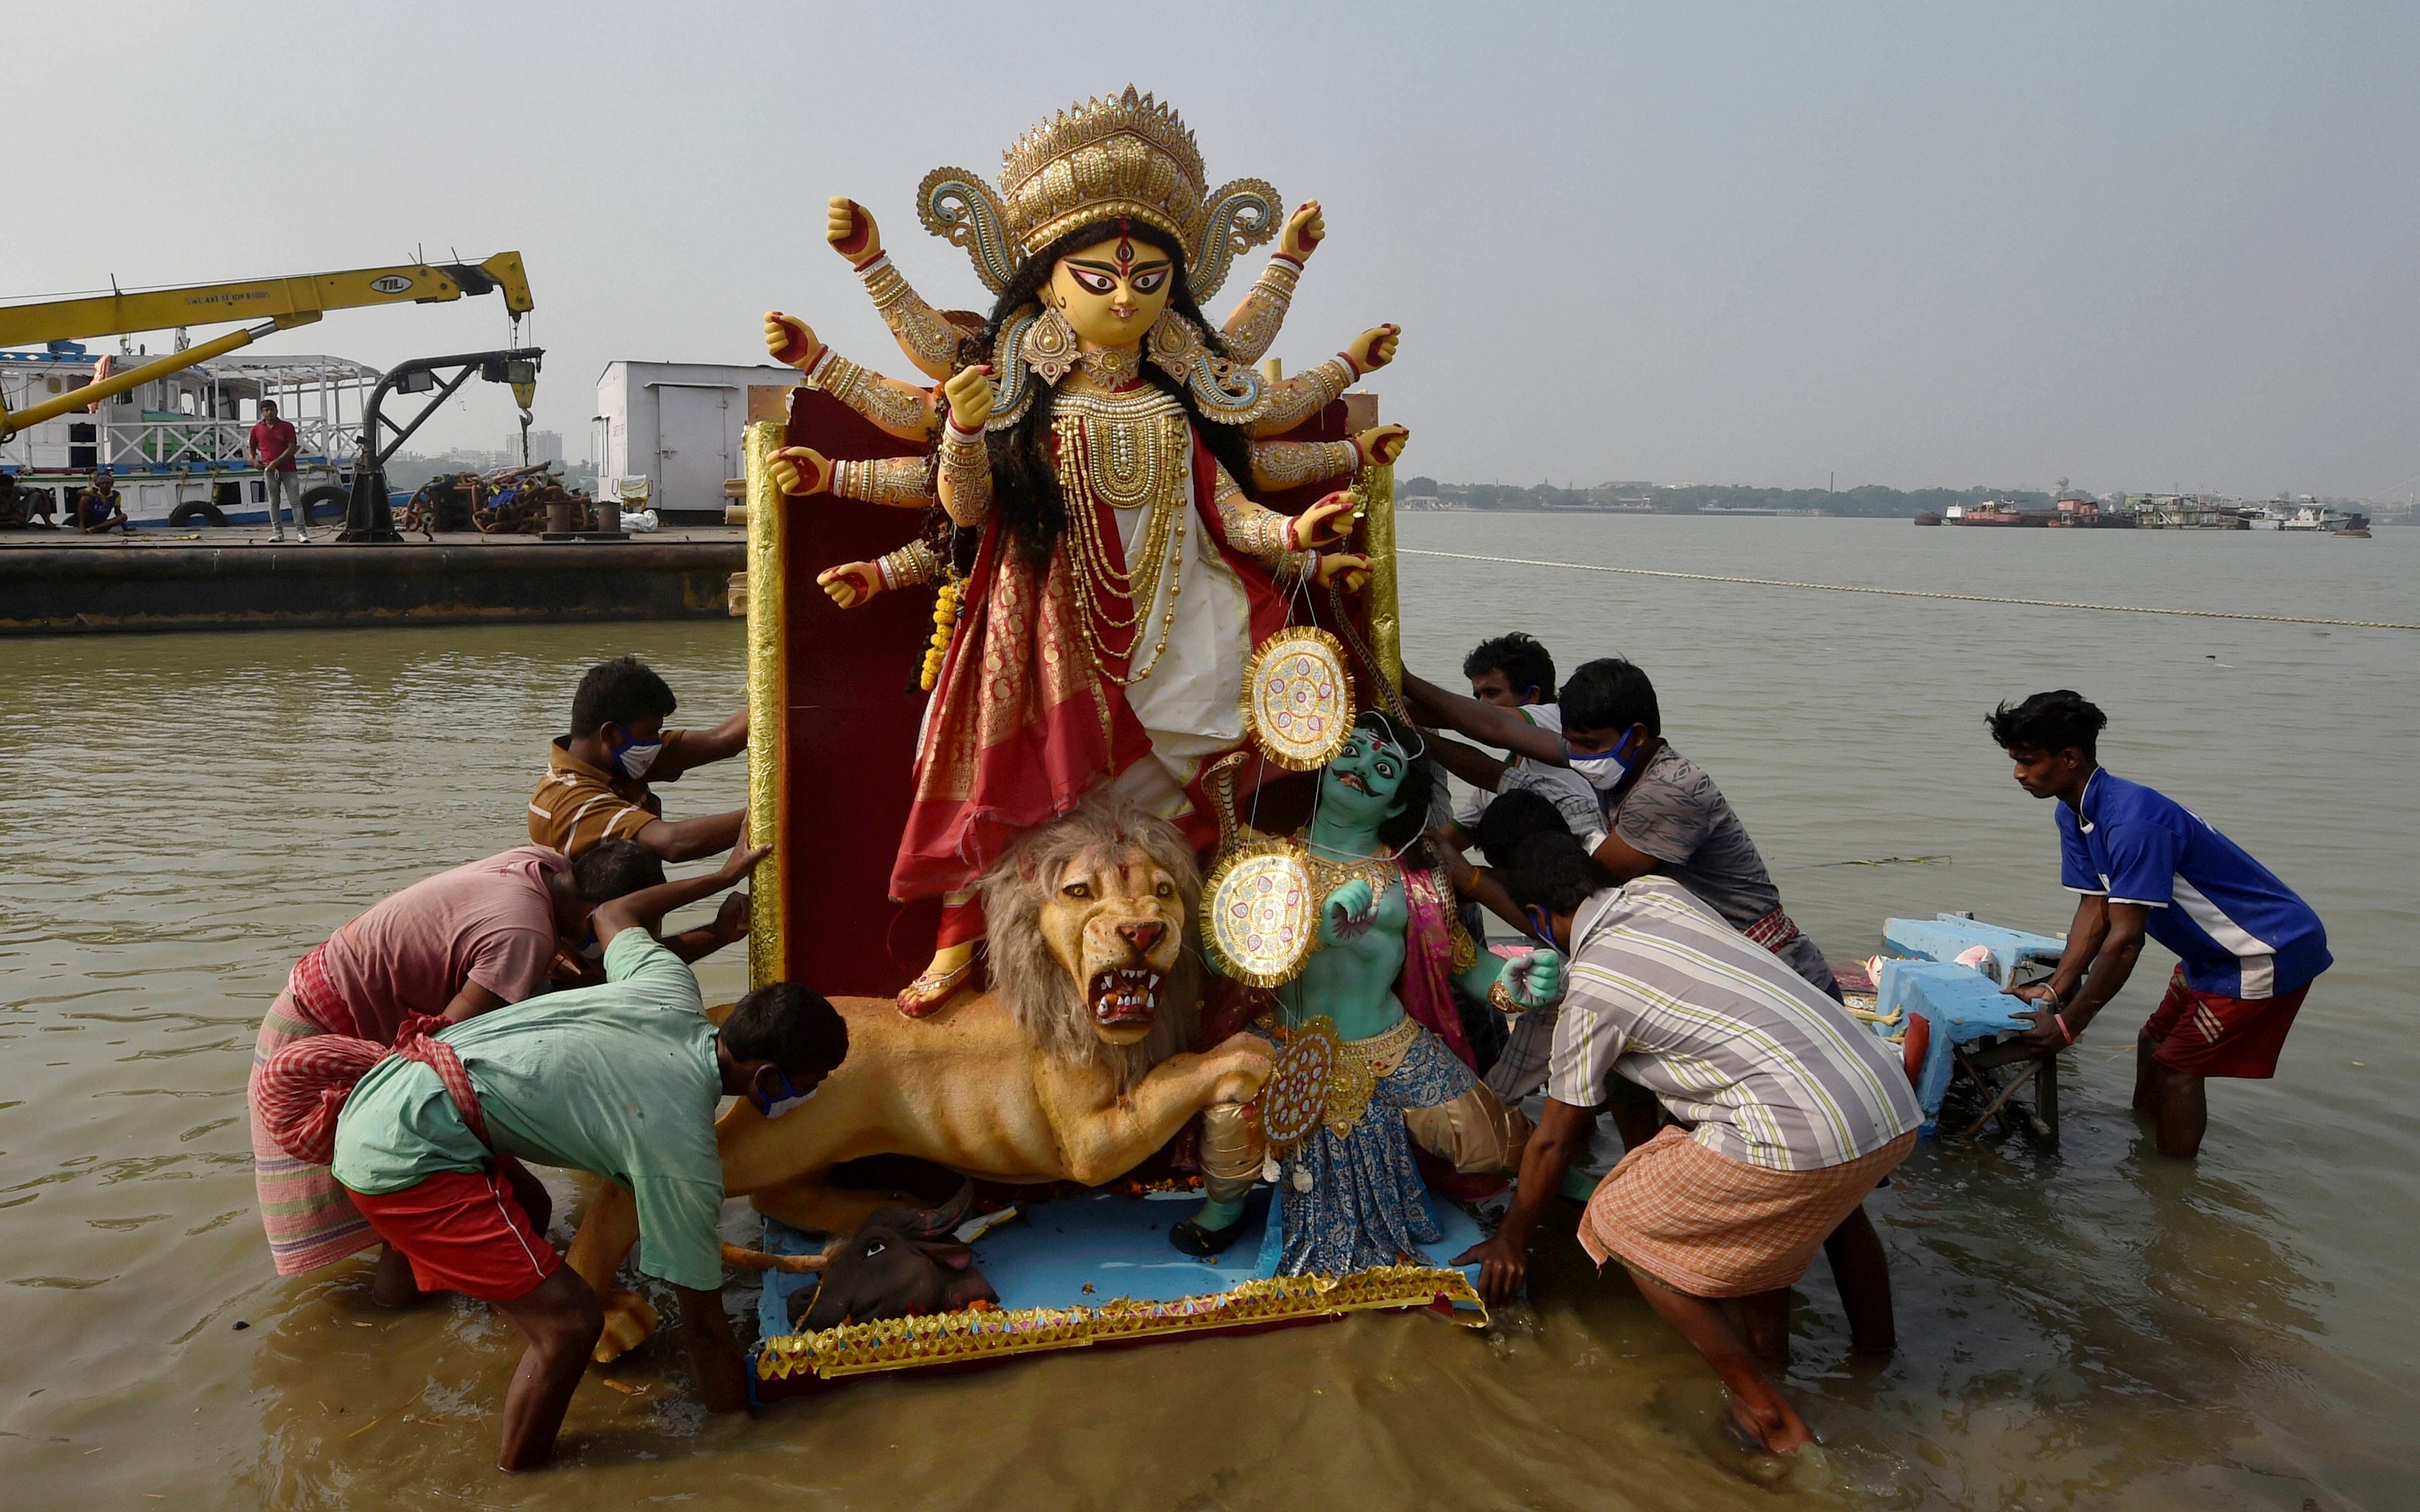 Devotees immerse an idol of Goddess Durga in Ganga river after Durga Puja festival, in Kolkata, Wednesday, Oct. 28, 2020. Credit: PTI Photo